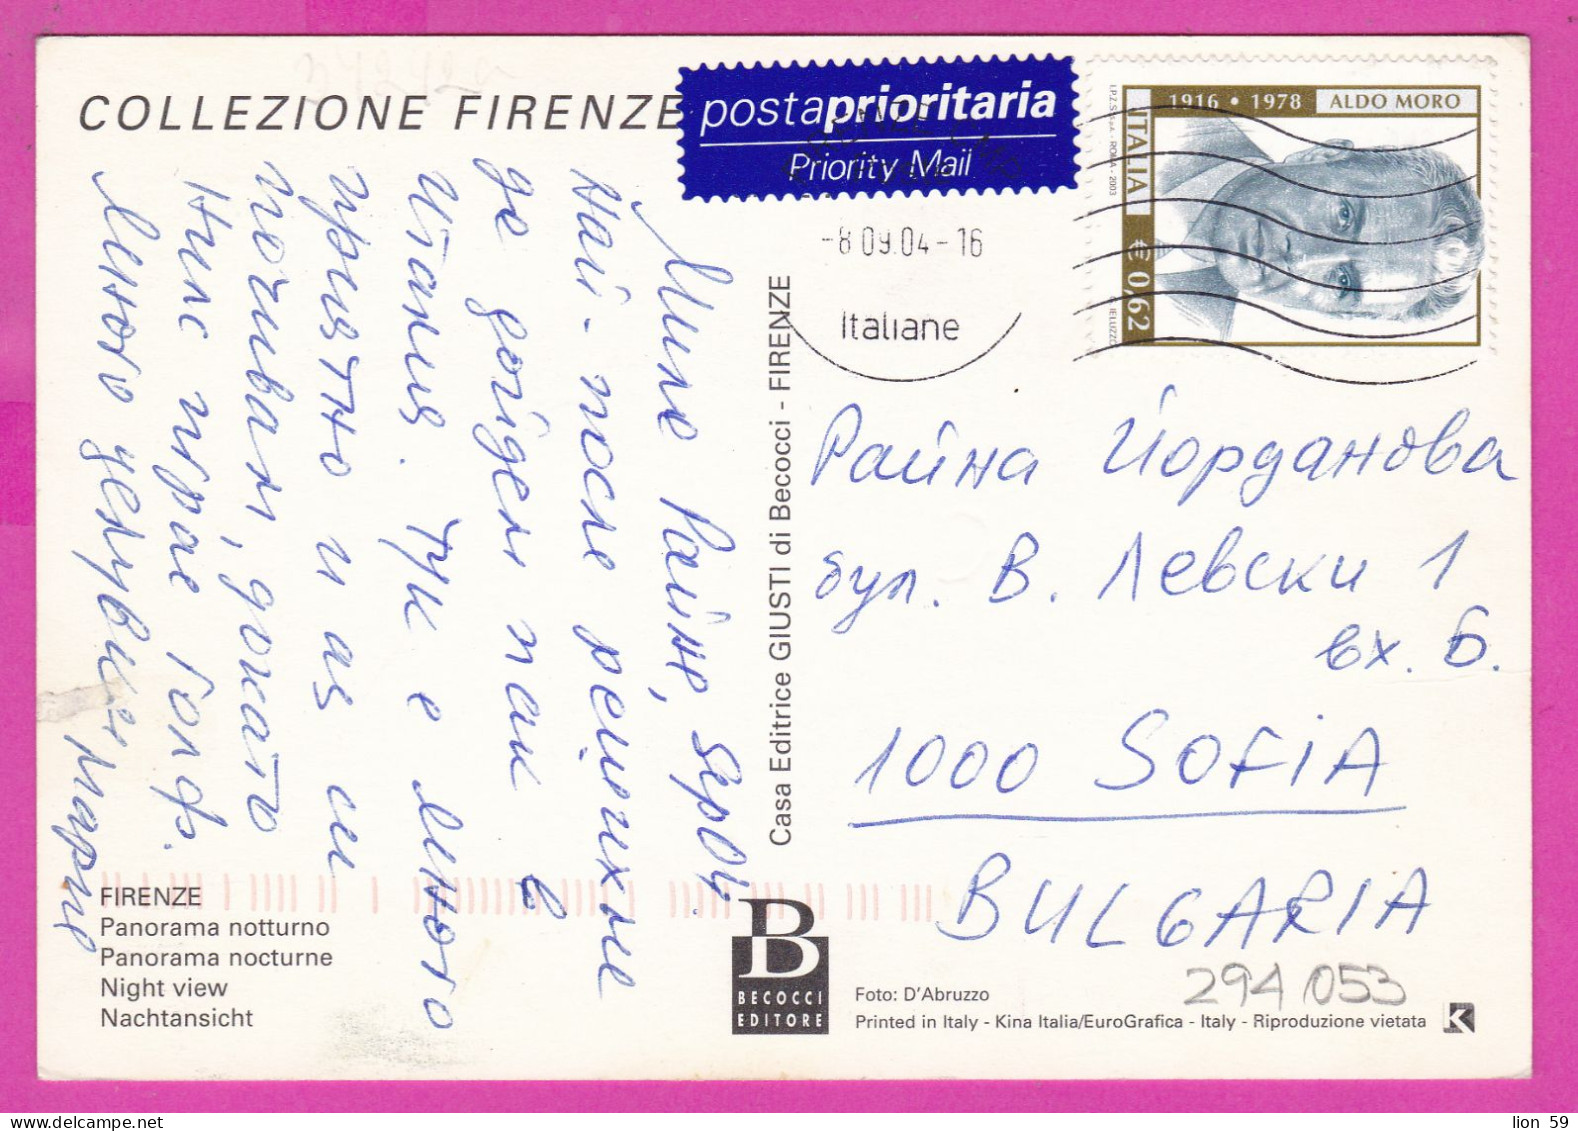 294053 / Italy - FIRENZE Panoram A Notturno Night PC 2004 USED - 0.62€ Death Of Aldo Moro Former Prime Minister - 2001-10: Marcofilia